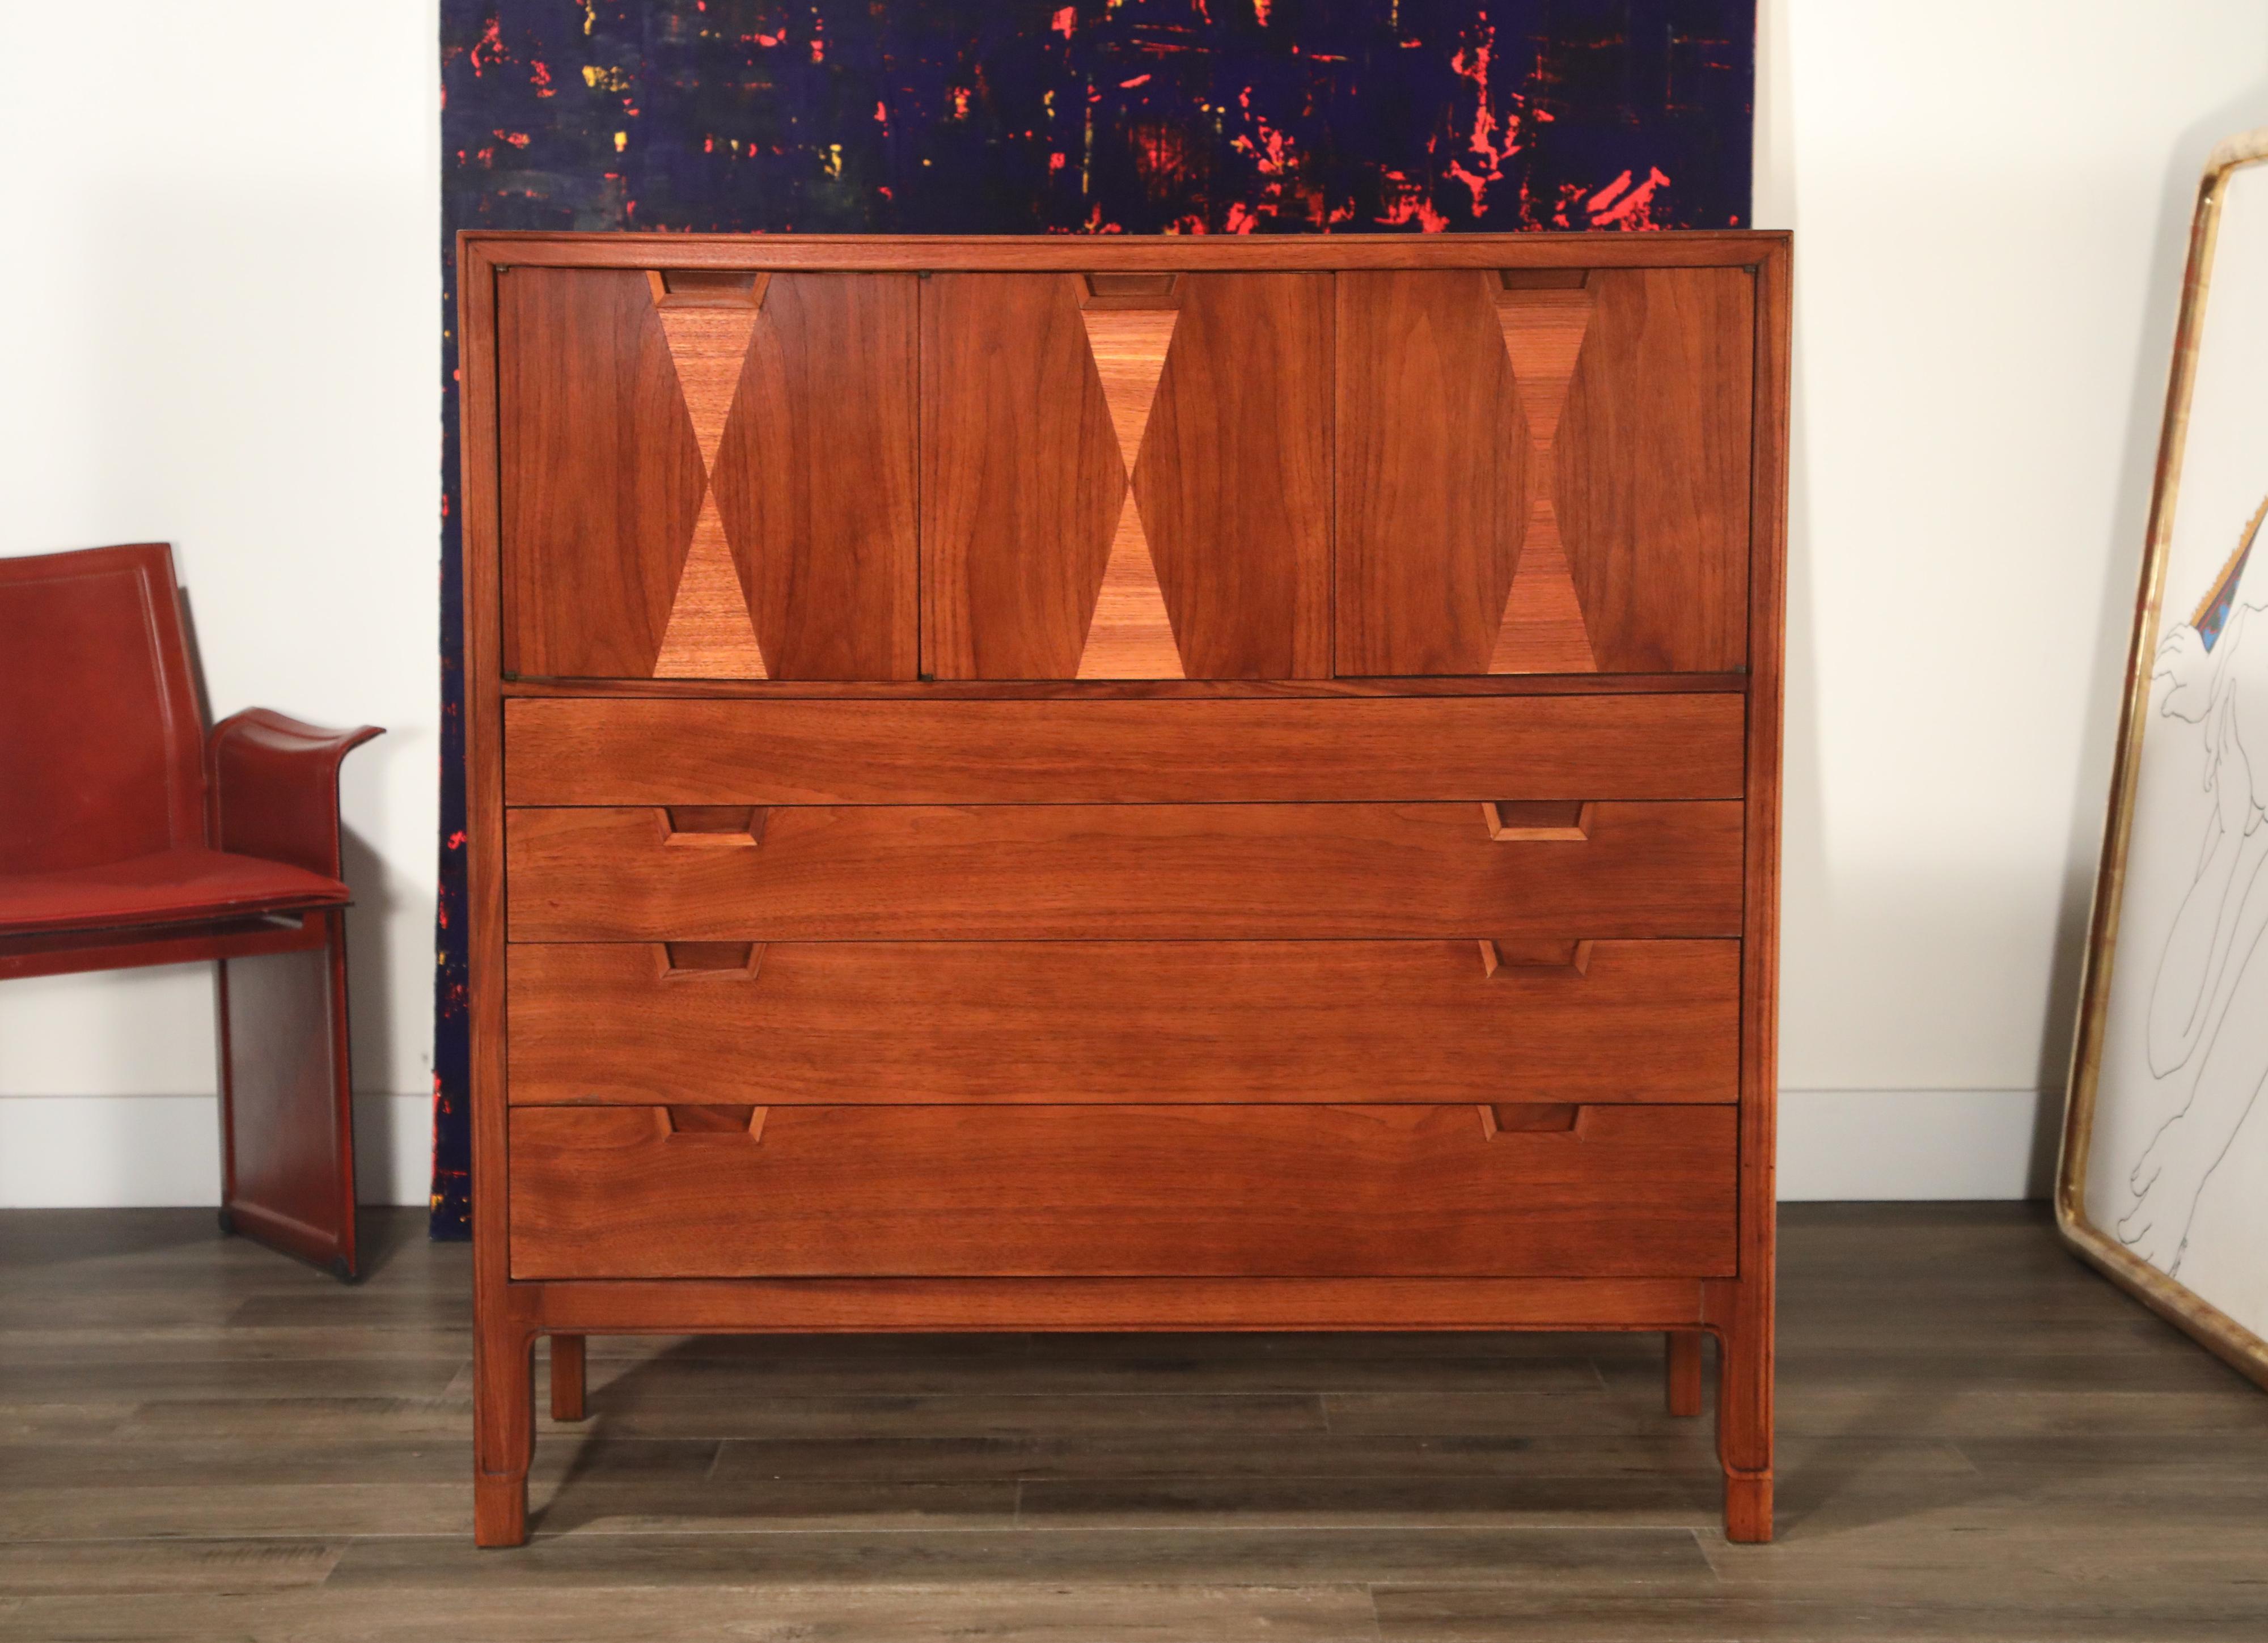 A beautifully restored highboy dresser by John Stuart for Janus Collection by Mount Airy Furniture Company. This classic 1960s design is accented by hourglass shaped alternating veneers. Cabinet doors atop open to cubby space while four drawers open